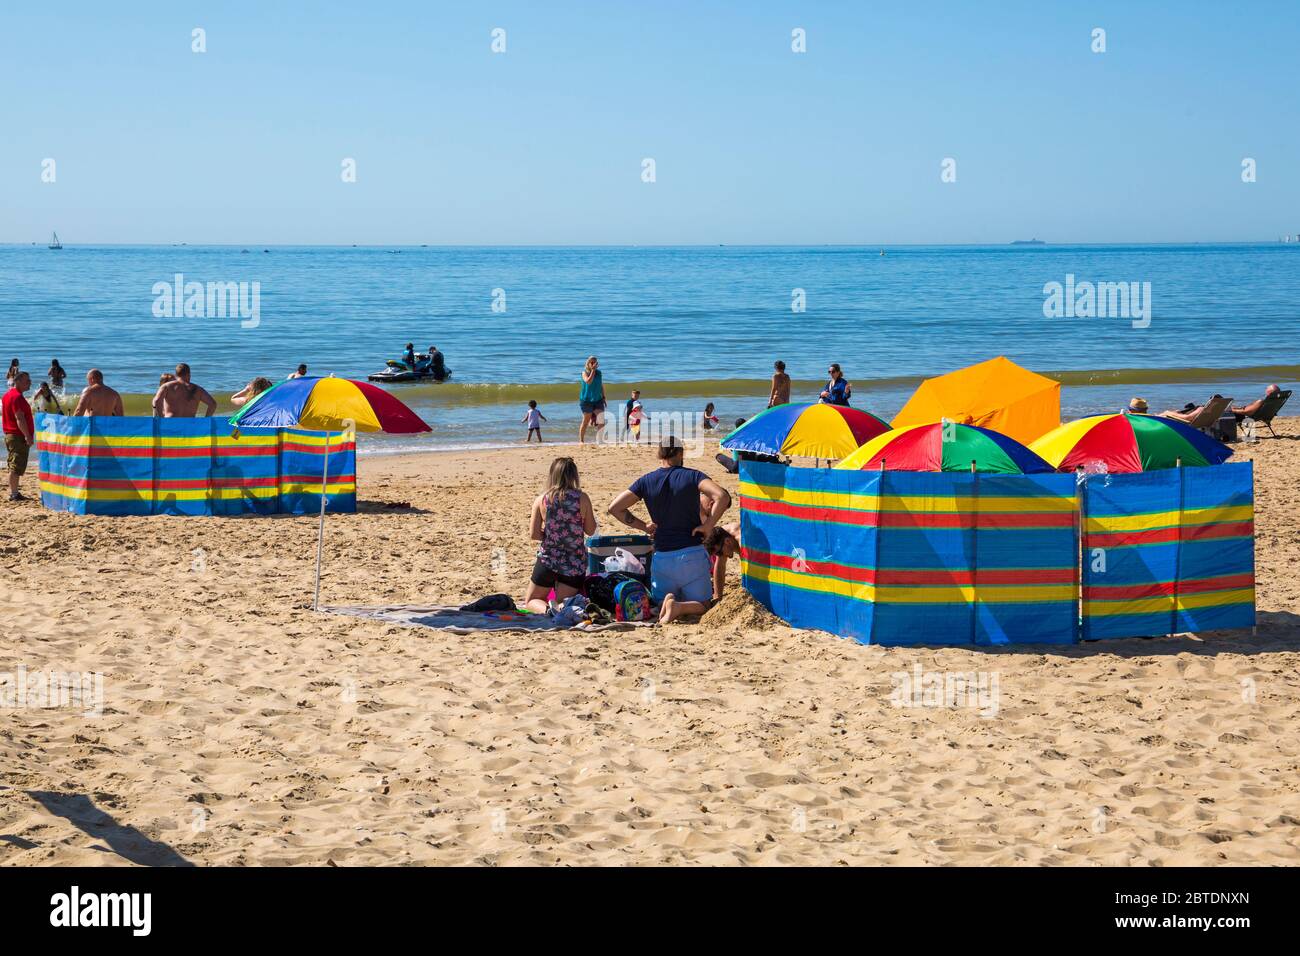 Bournemouth, Dorset UK. 25th May 2020. UK weather: scorching hot at Bournemouth beaches with clear blue skies and unbroken sunshine, as temperatures soar on Bank Holiday Monday. Sunseekers flock to the seaside, getting there early to get a good spot, as beaches get packed. Credit: Carolyn Jenkins/Alamy Live News Stock Photo